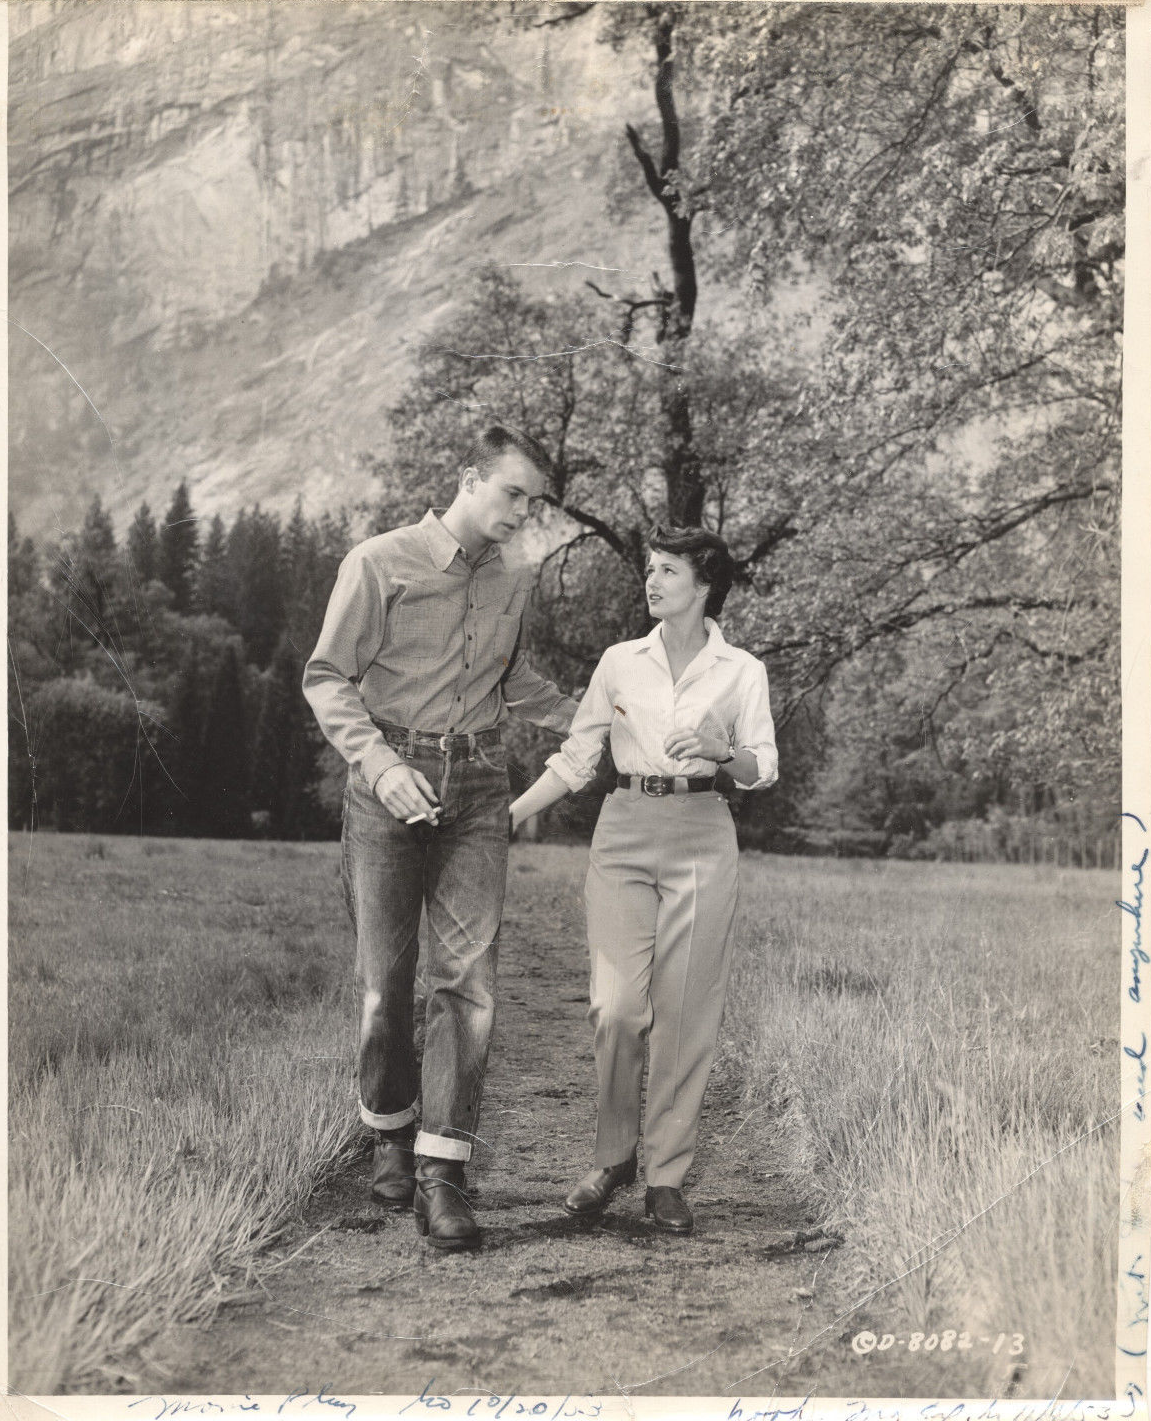  Bob and May Wynn, Columbia Pictures,  The Caine Mutiny , on location in Yosemite, Summer 1953. 